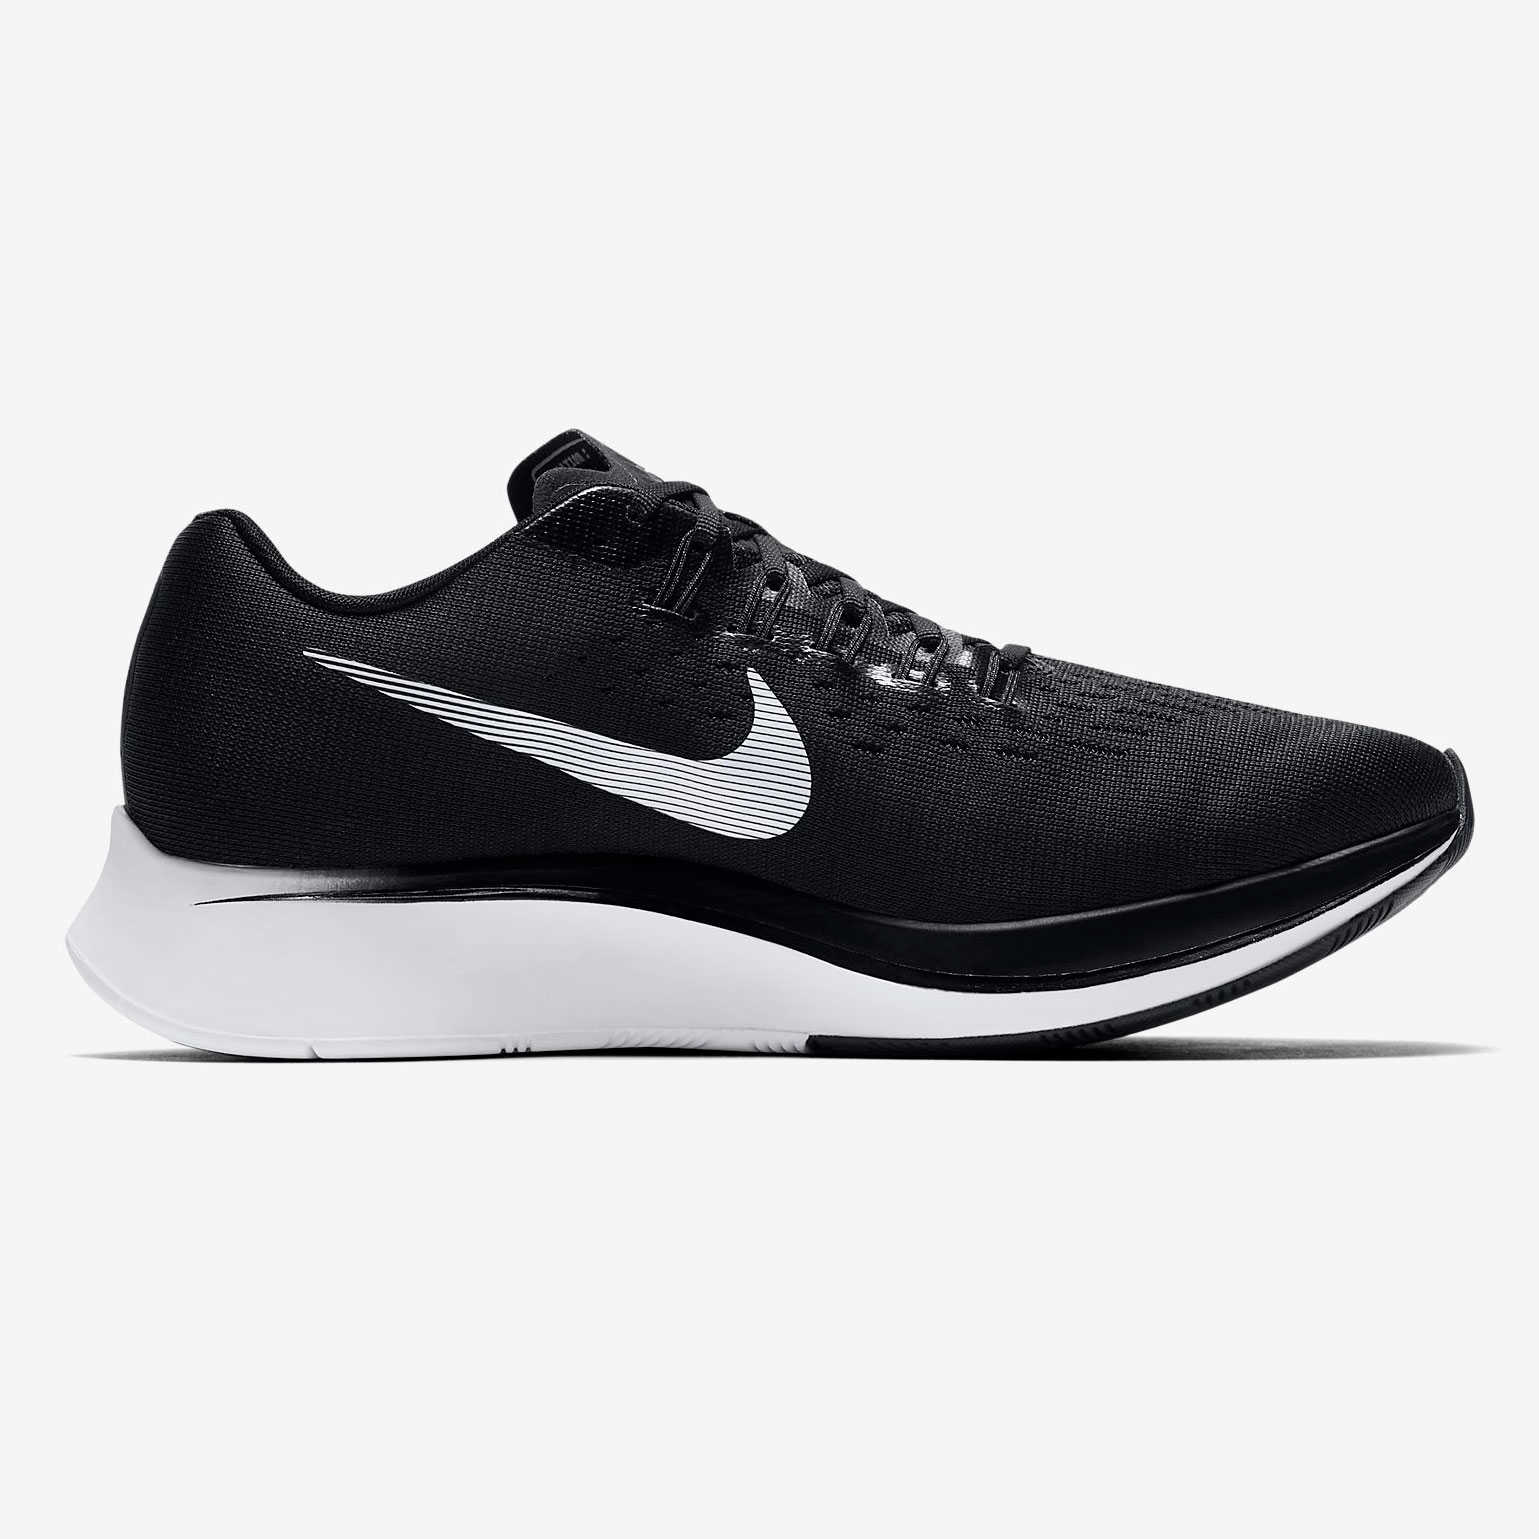 Chaussure de Running Zoom Fly - Black White Anthracite